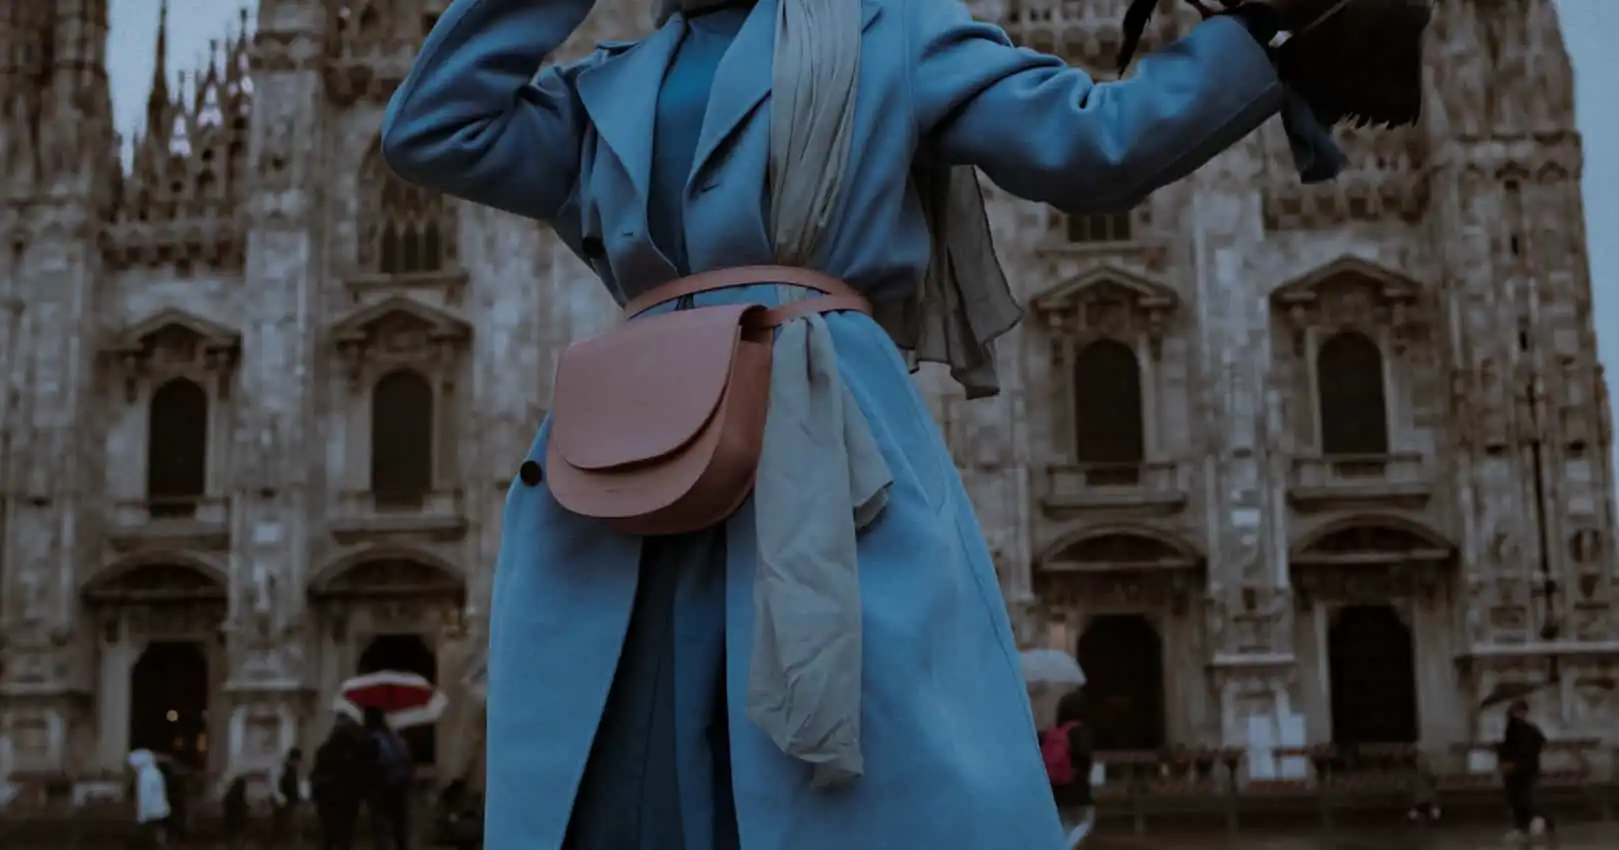 pink leather bag and blue coat